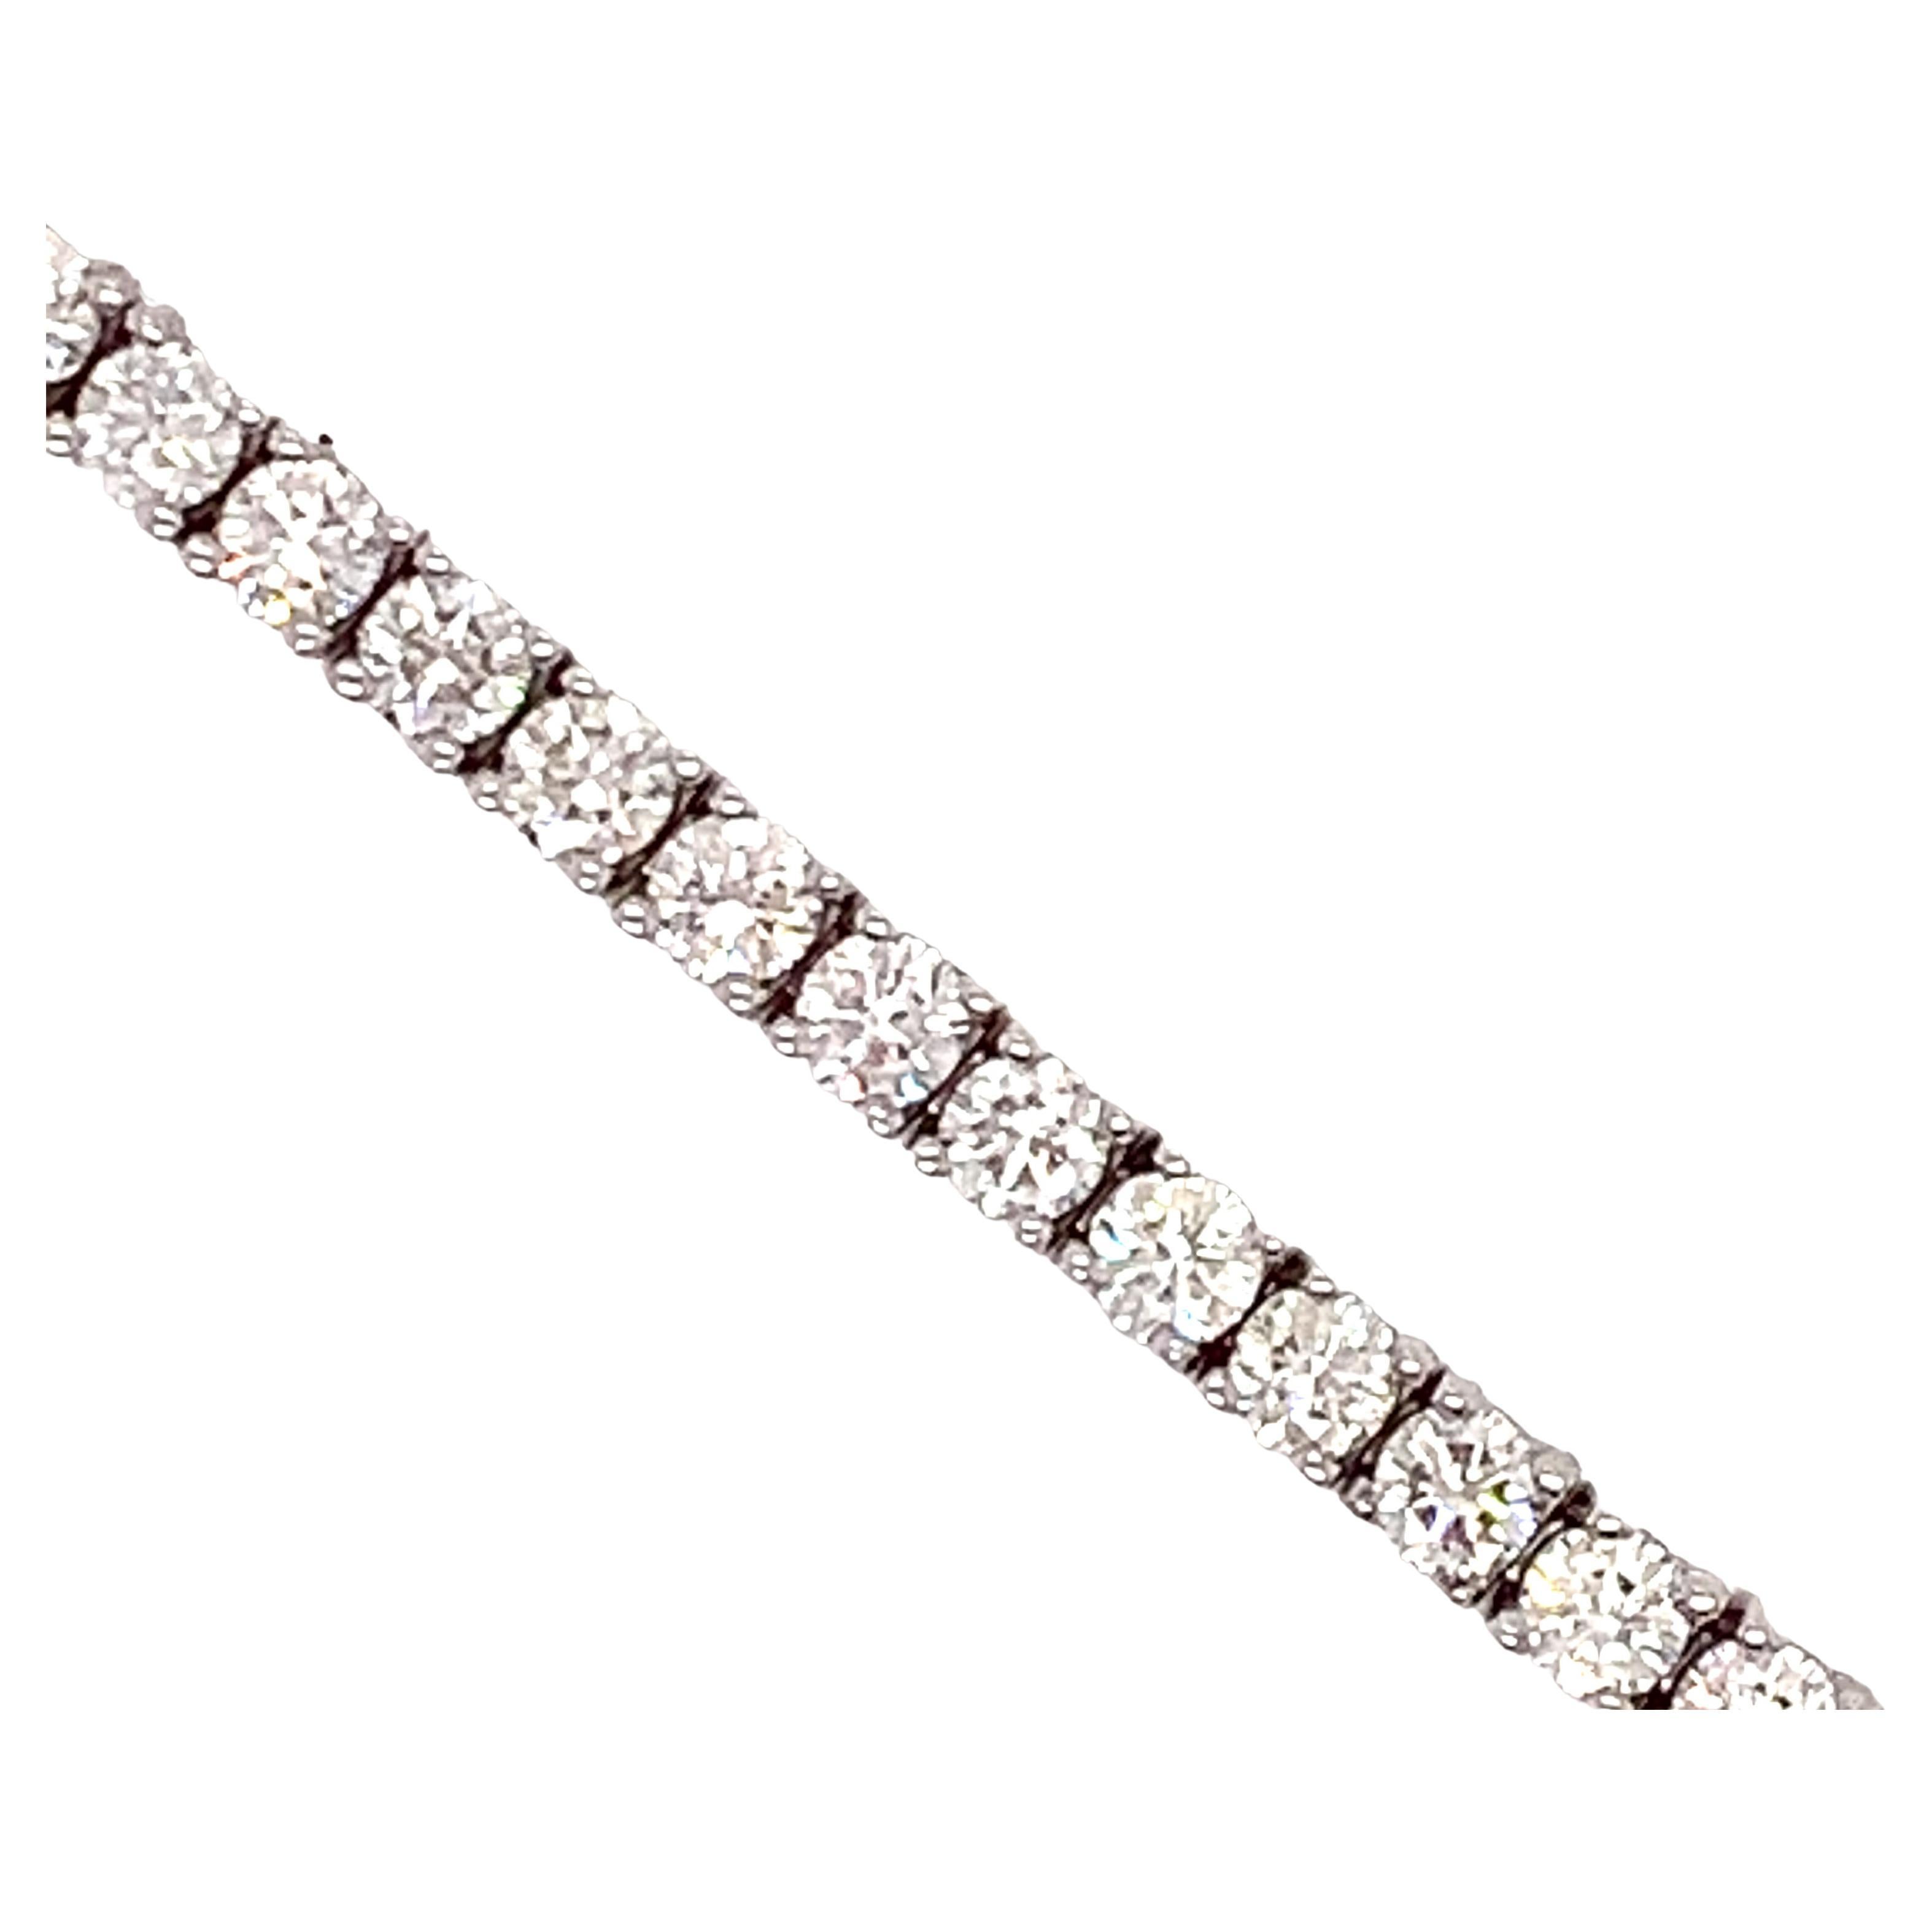 Whether it's your first diamond tennis bracelet or you collect them, this classic beauty is 7.75 cttw in round diamonds. There are forty nine diamonds each weighing approximately .15 carats each. These are VS clarity with a G-H color. The diamonds